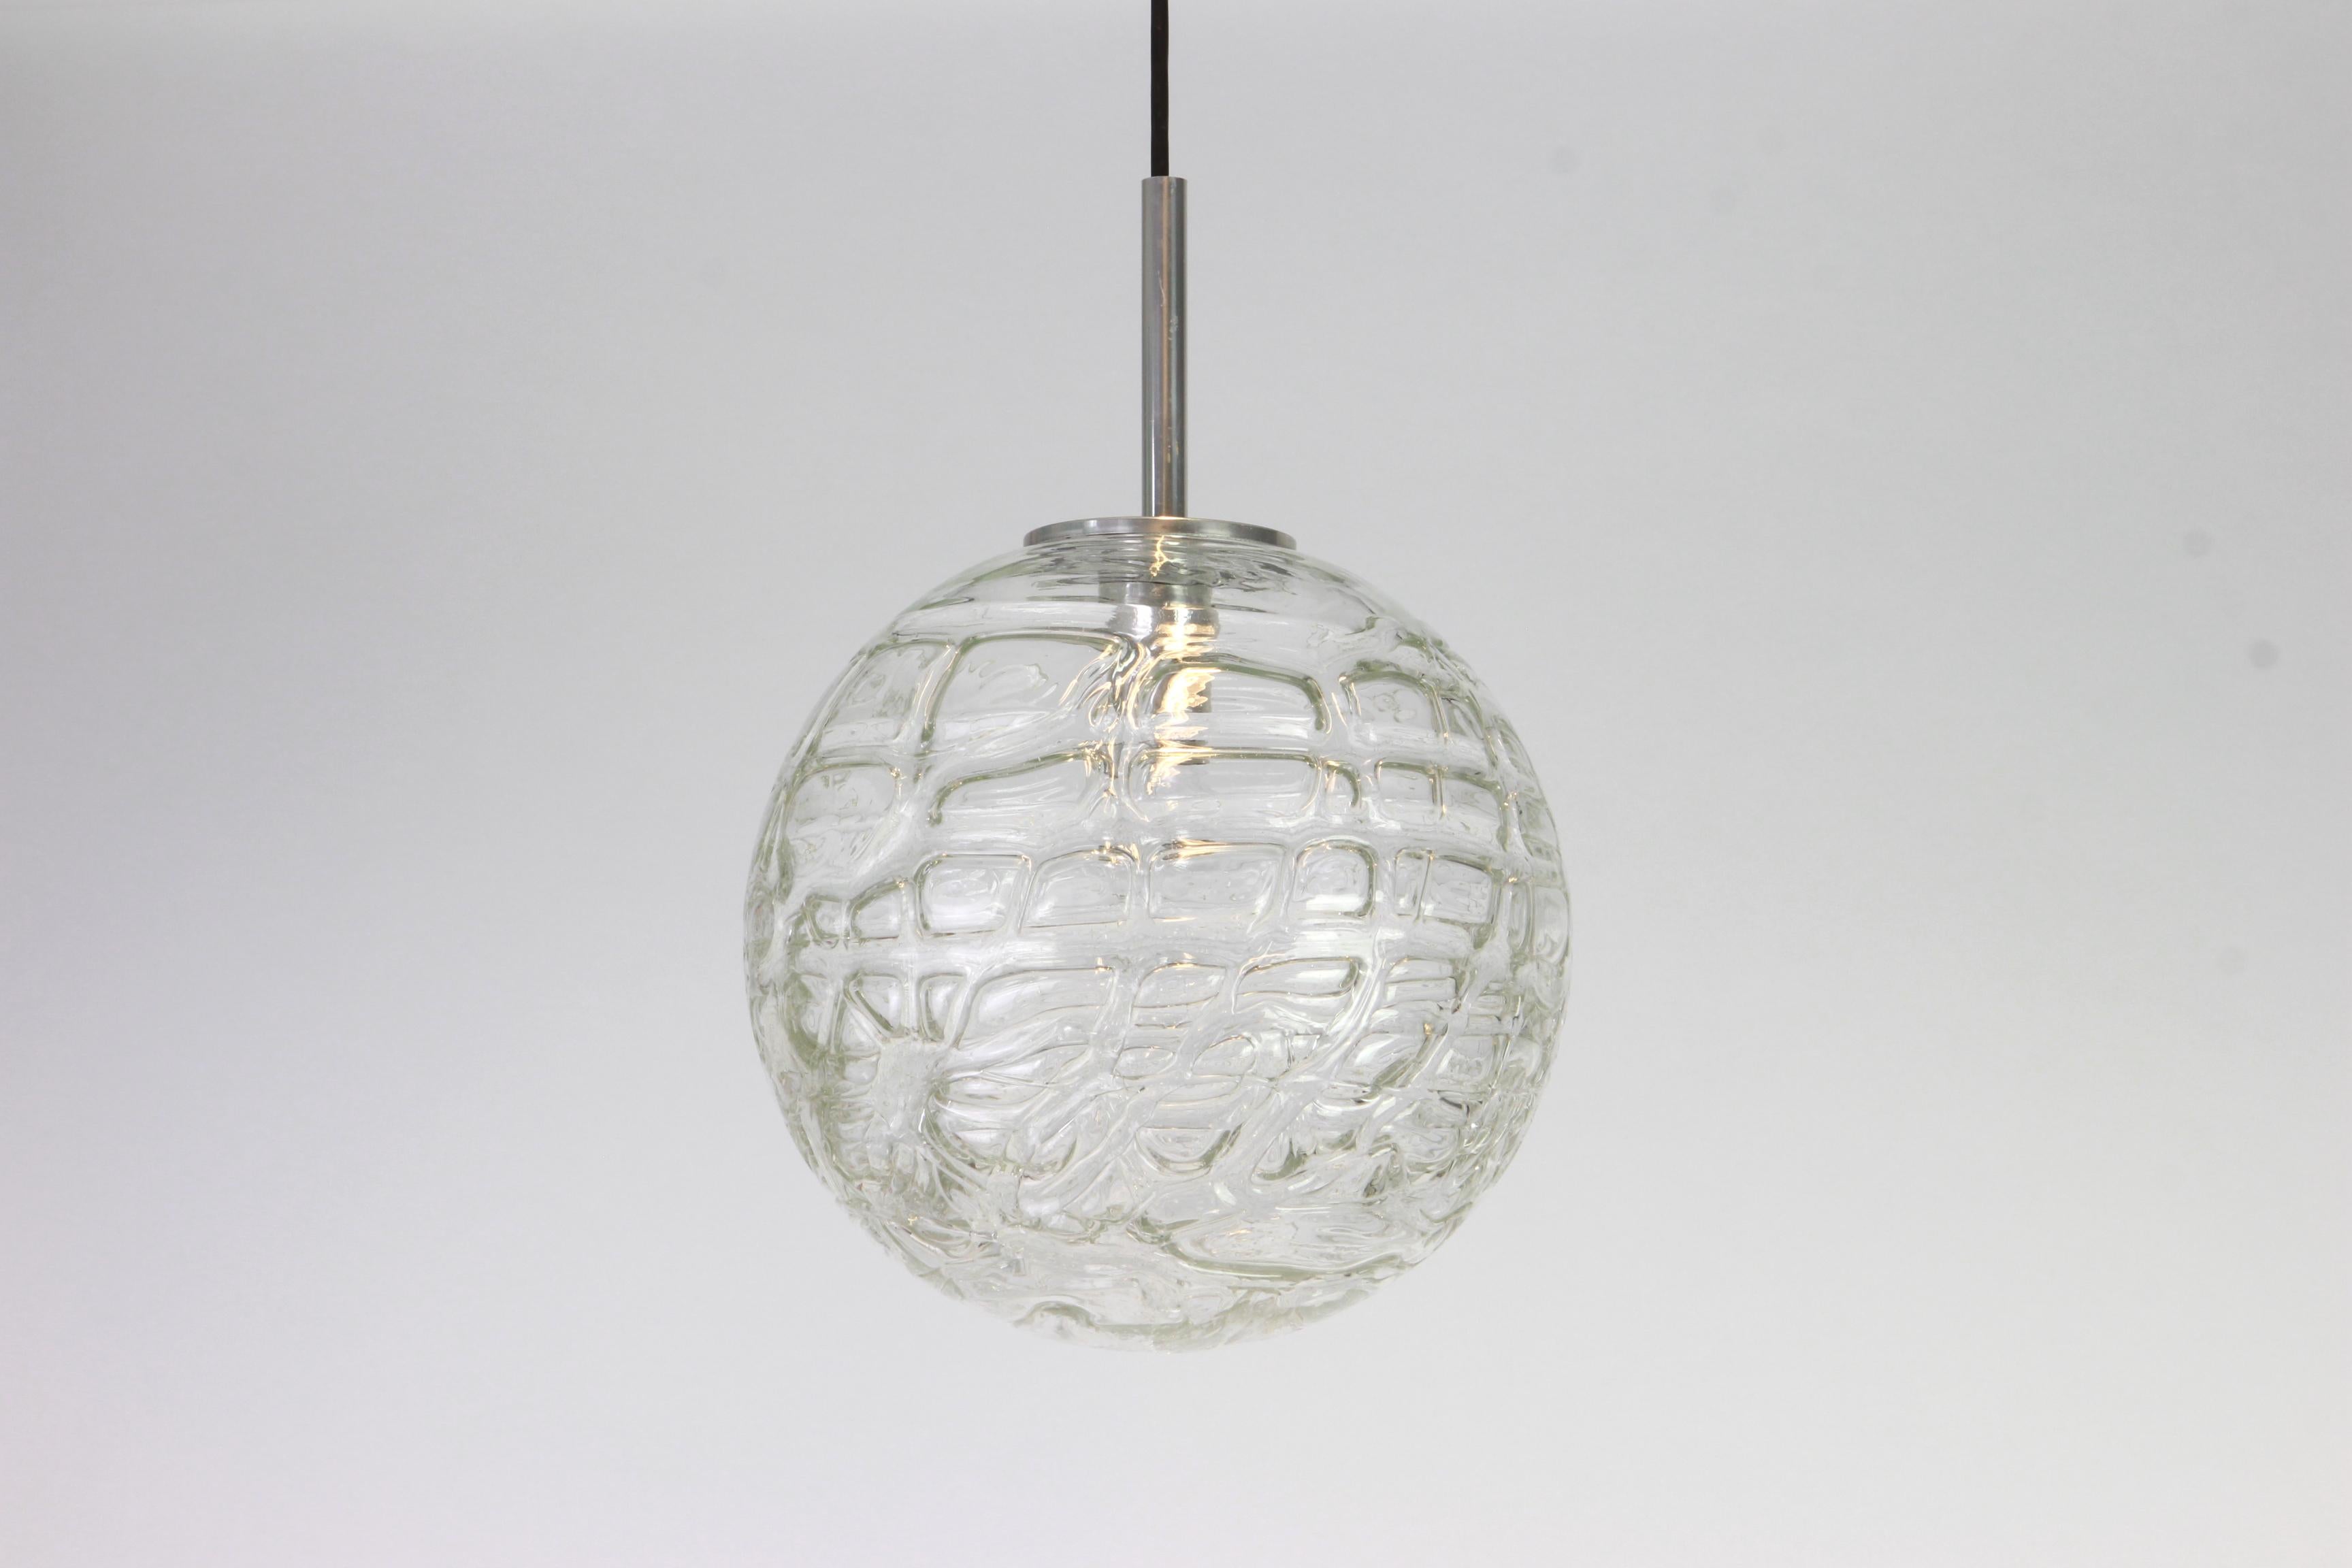 Doria ceiling light with large volcanic Murano glass ball.
High quality of materials, gives a wonderful light effect when it is on.

Sockets: One E27 standard bulbs. Max 80 watt and function on voltage from 110 till 240 volts. (For USA, UK